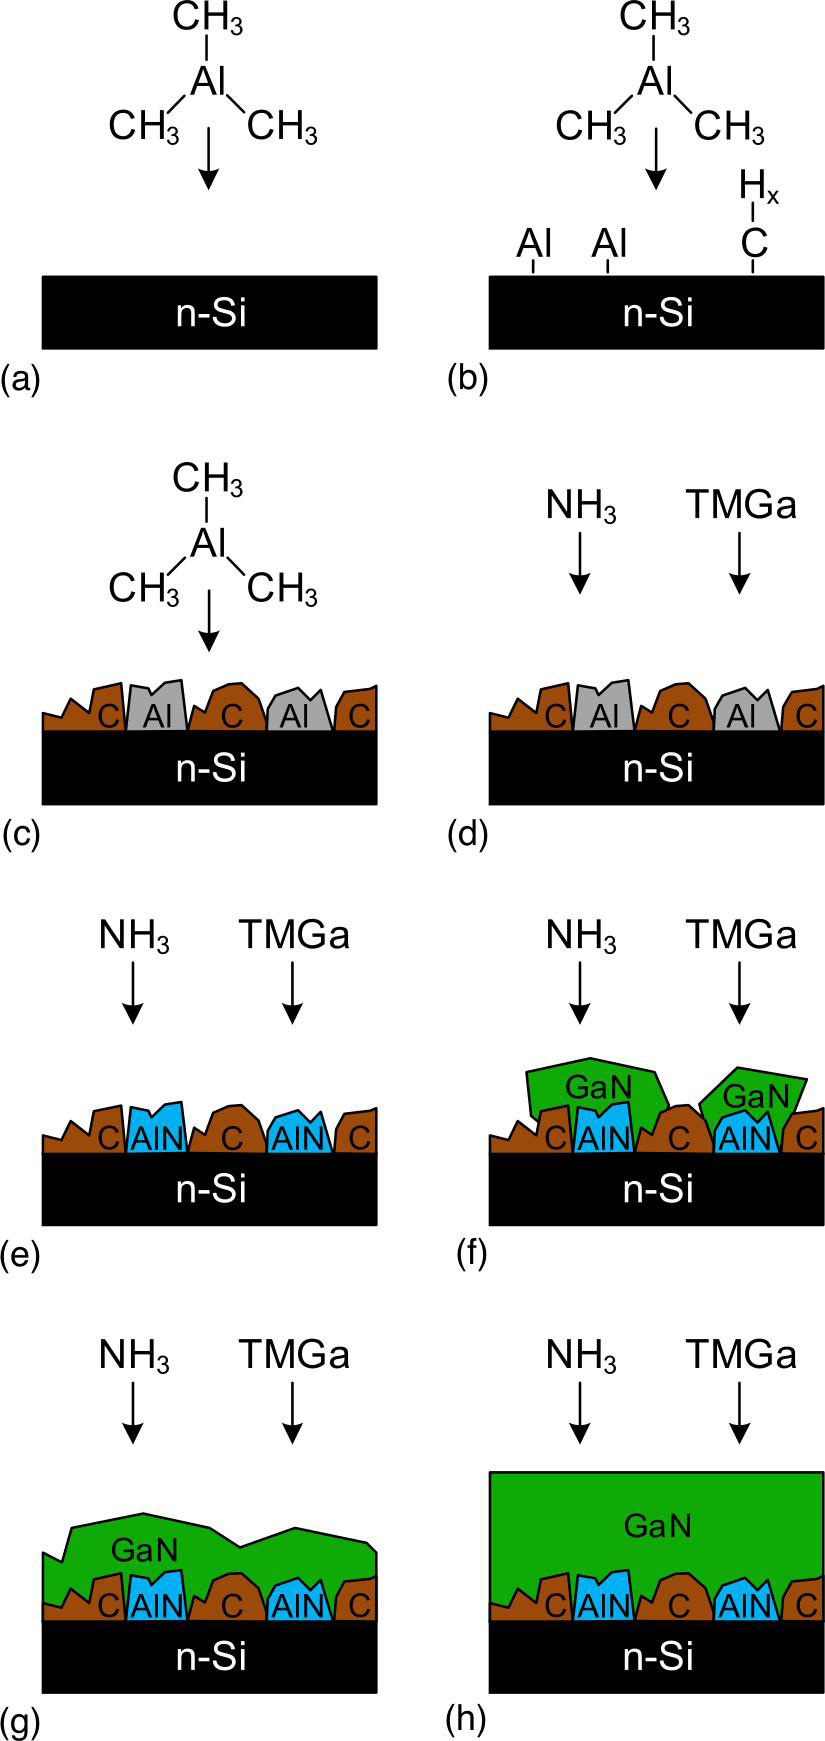 Figure 2: Suggested growth mechanisms: (a–c) Preflow deposition of Al and C. (d–e) Nitridation of Al during early GaN step. (f) 3D GaN growth on AlN regions. (g) Coalescence. (h) 2D layer-by-layer growth. 